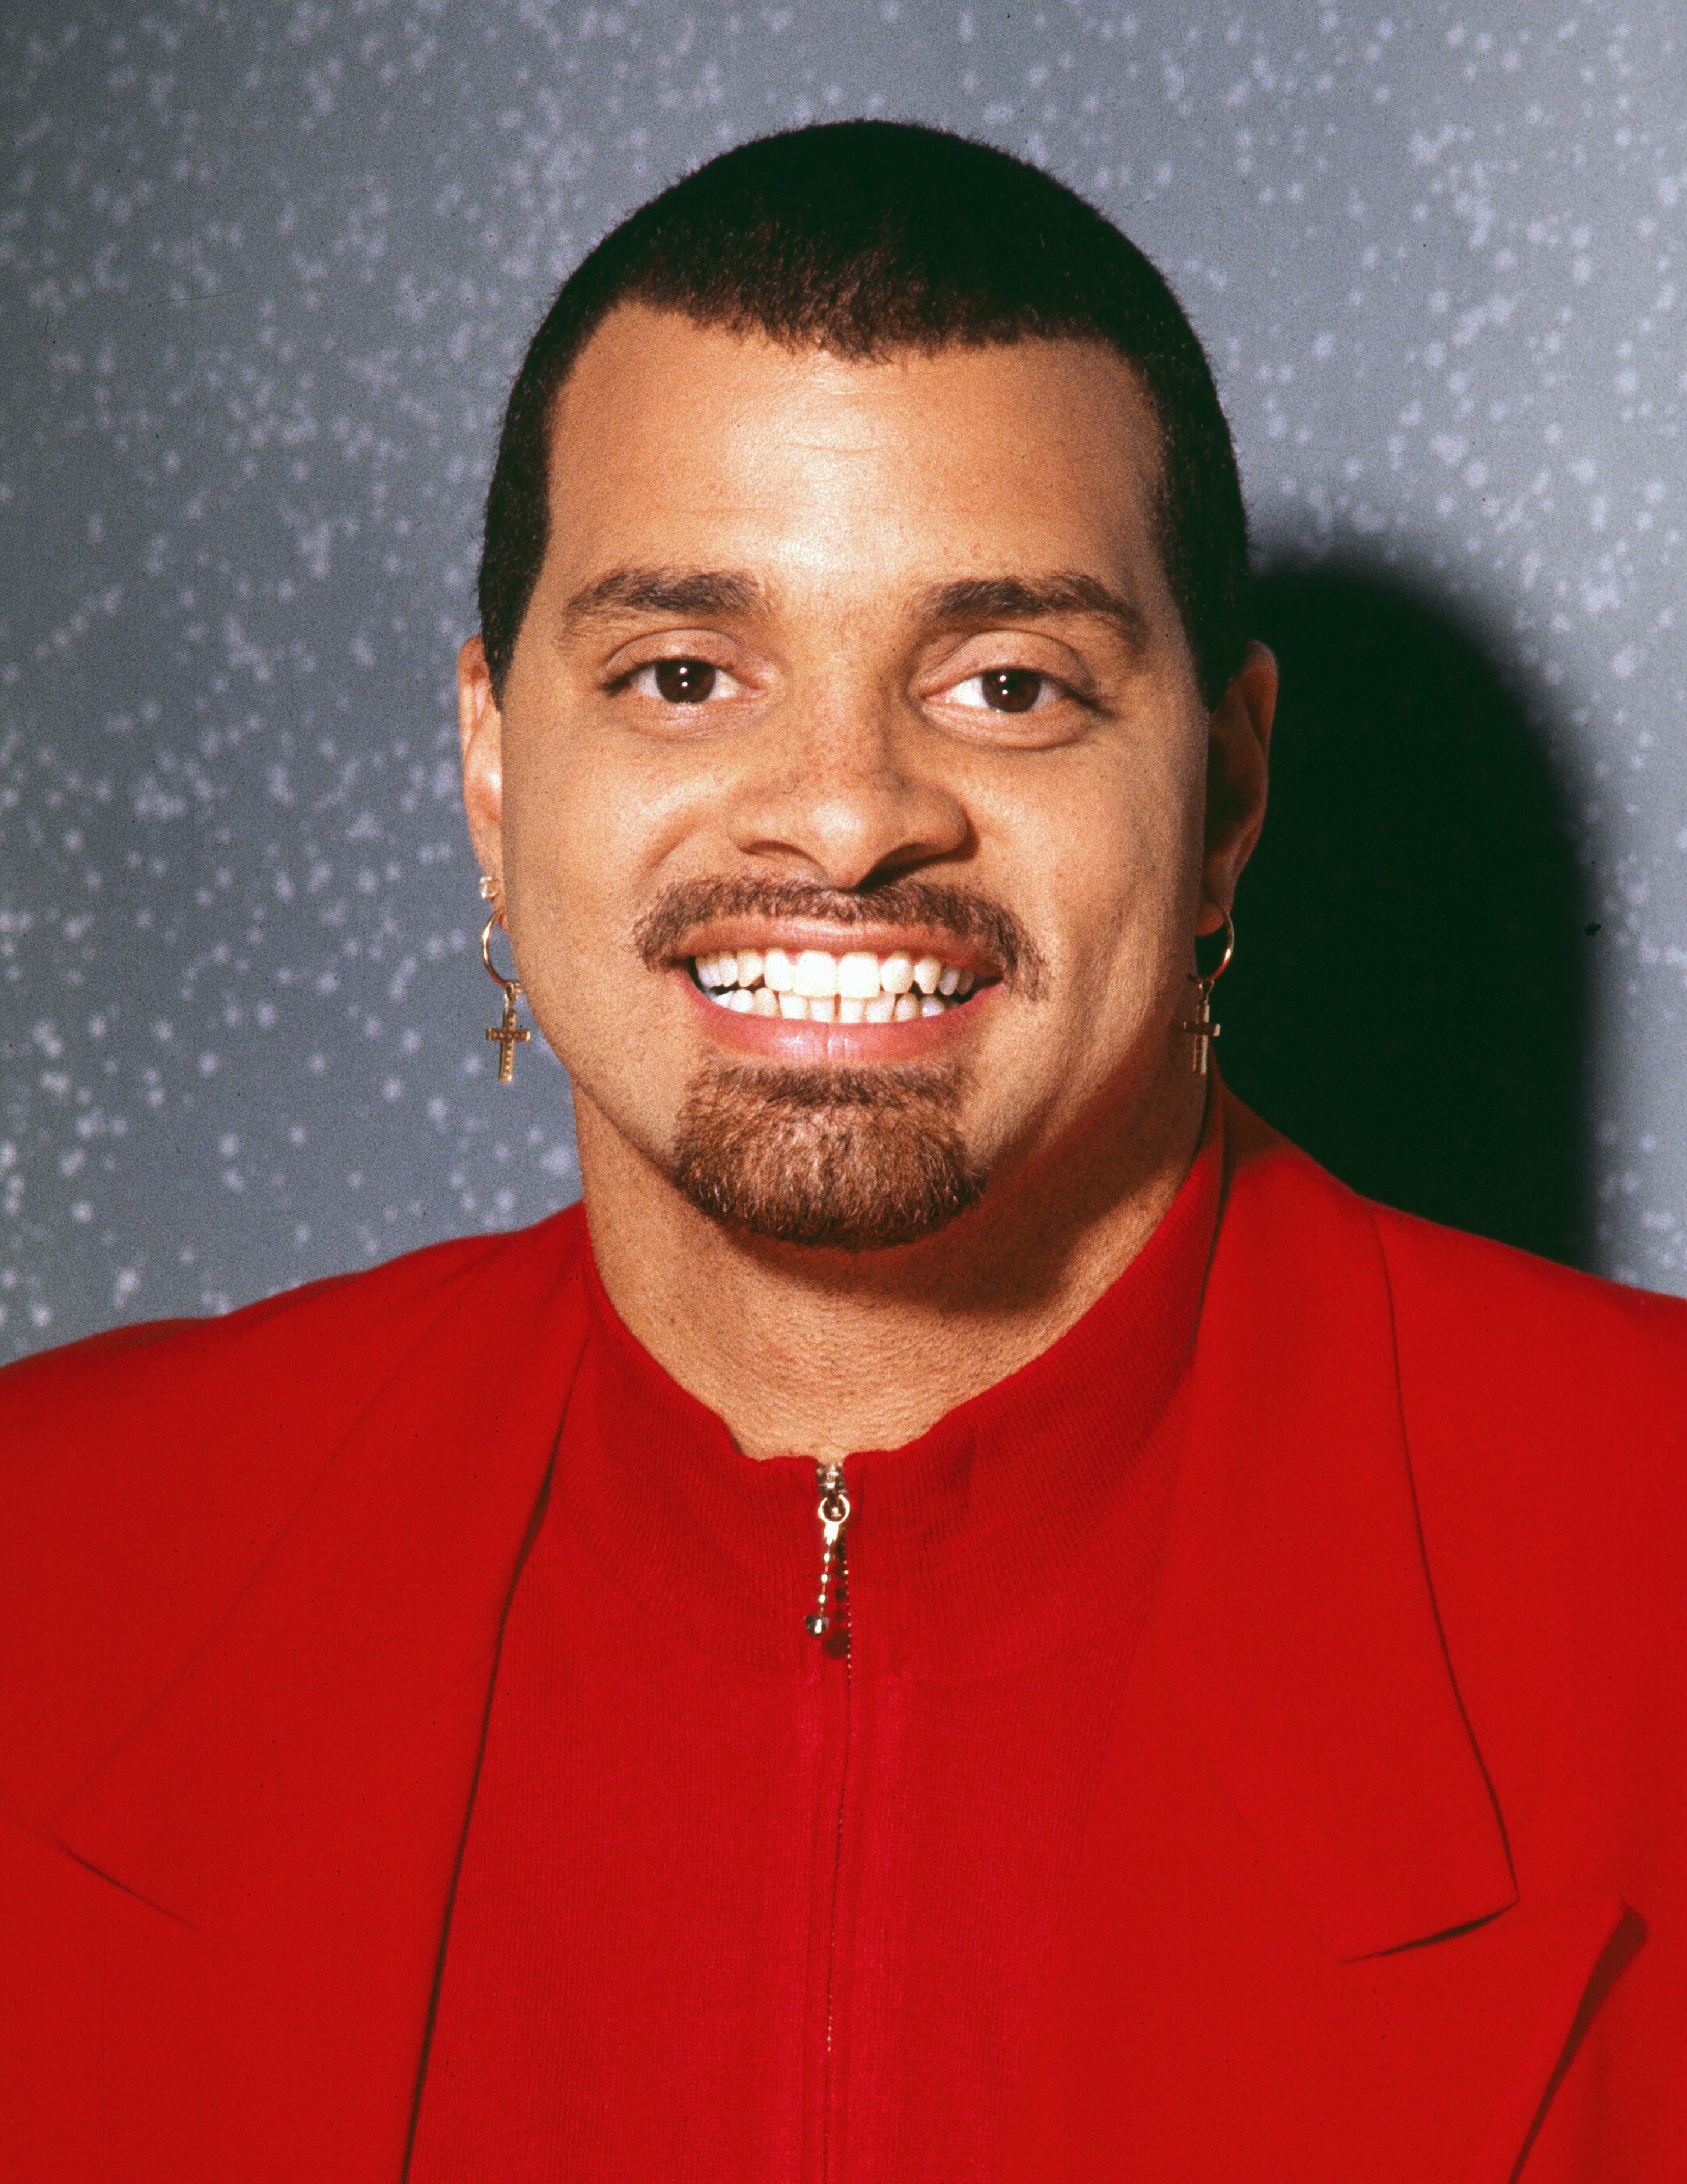 Sinbad posing in a red button down shirt in the 90s